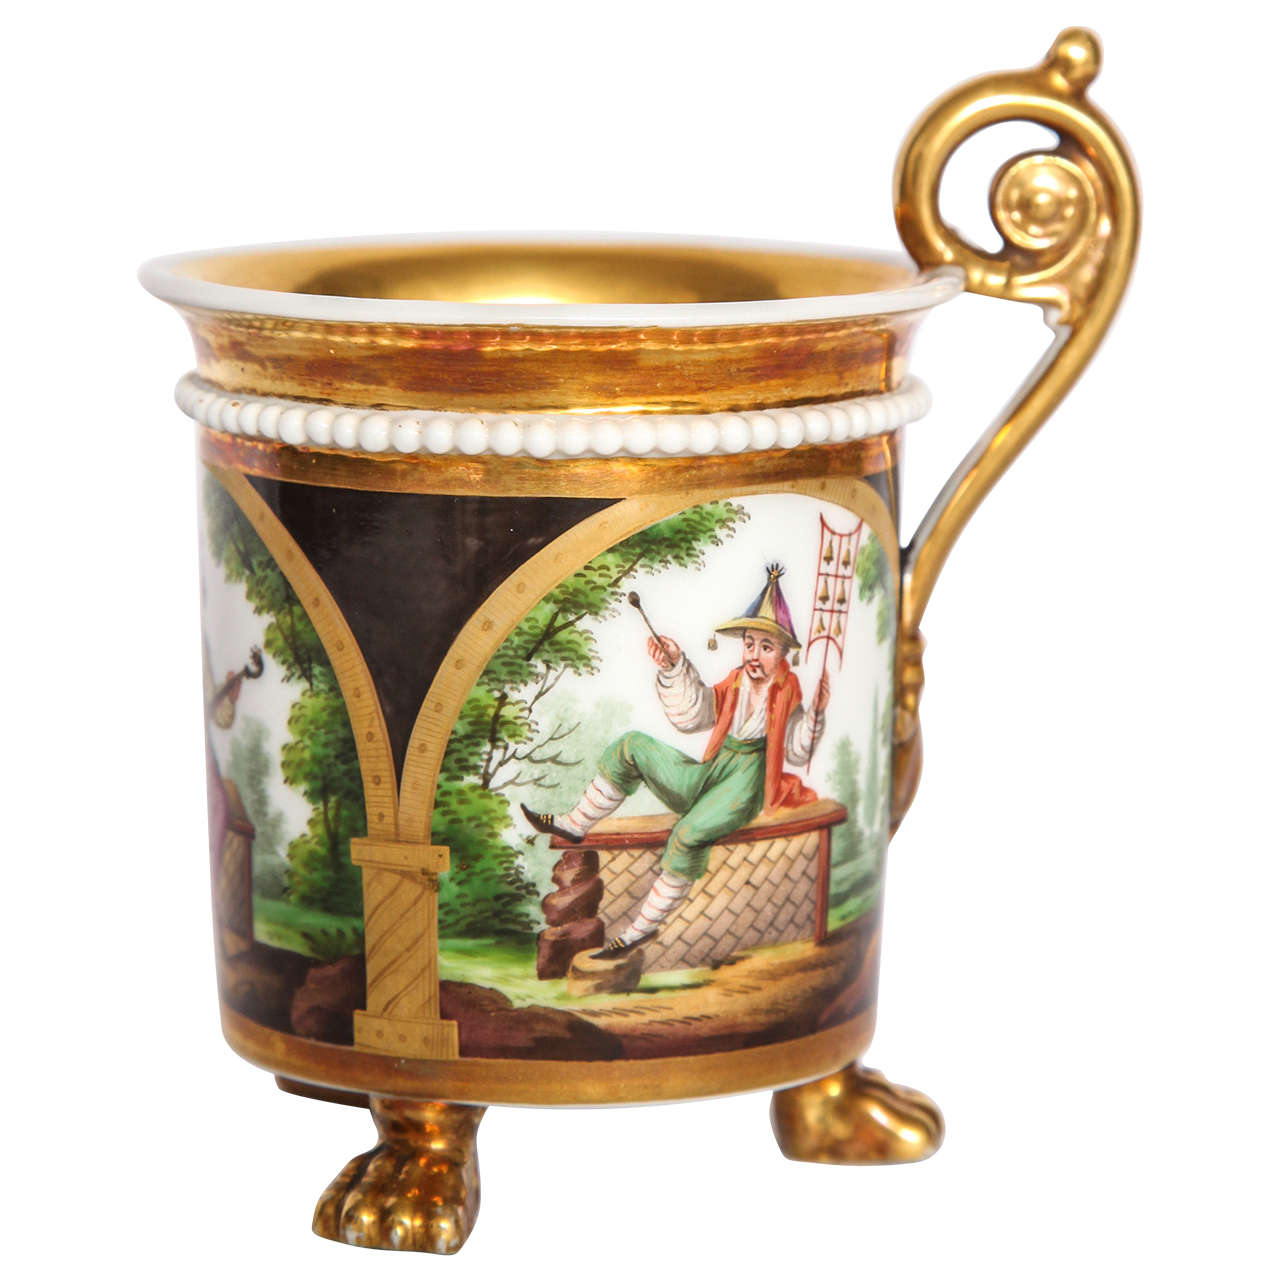 Paris porcelain gilt chinoiserie cup.   French footed coffee can with richly painted and gilt chinoiserie figures within gilt arcade on brown ground with gilt Interior.  France, early 19th century. 
Dimension: 5